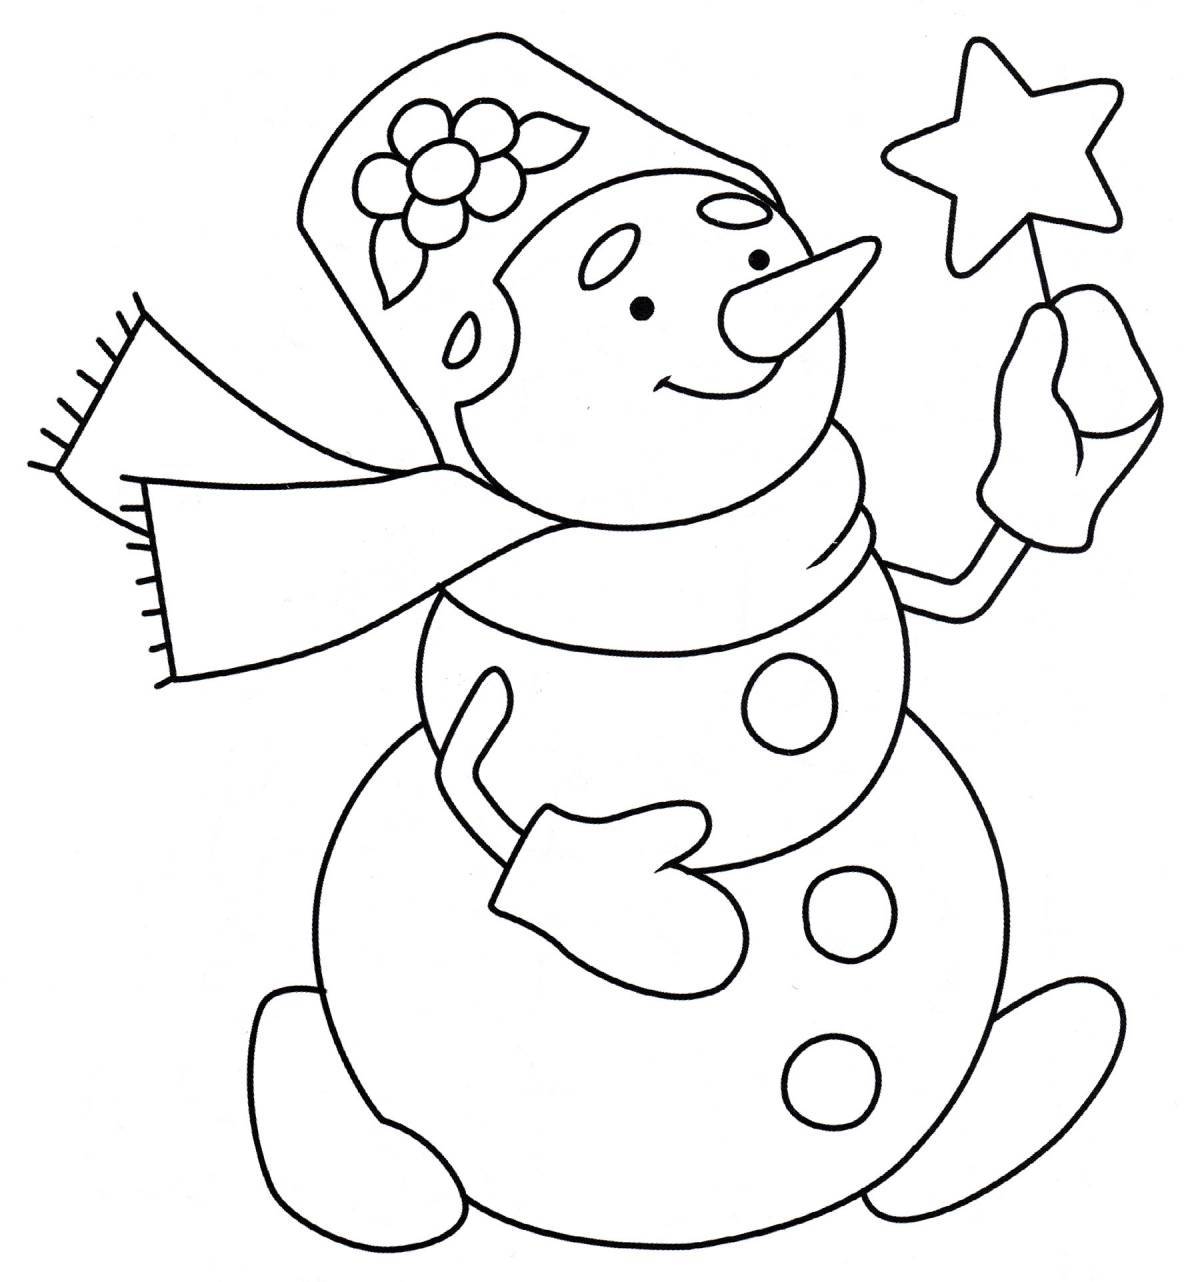 Holiday snowman coloring book